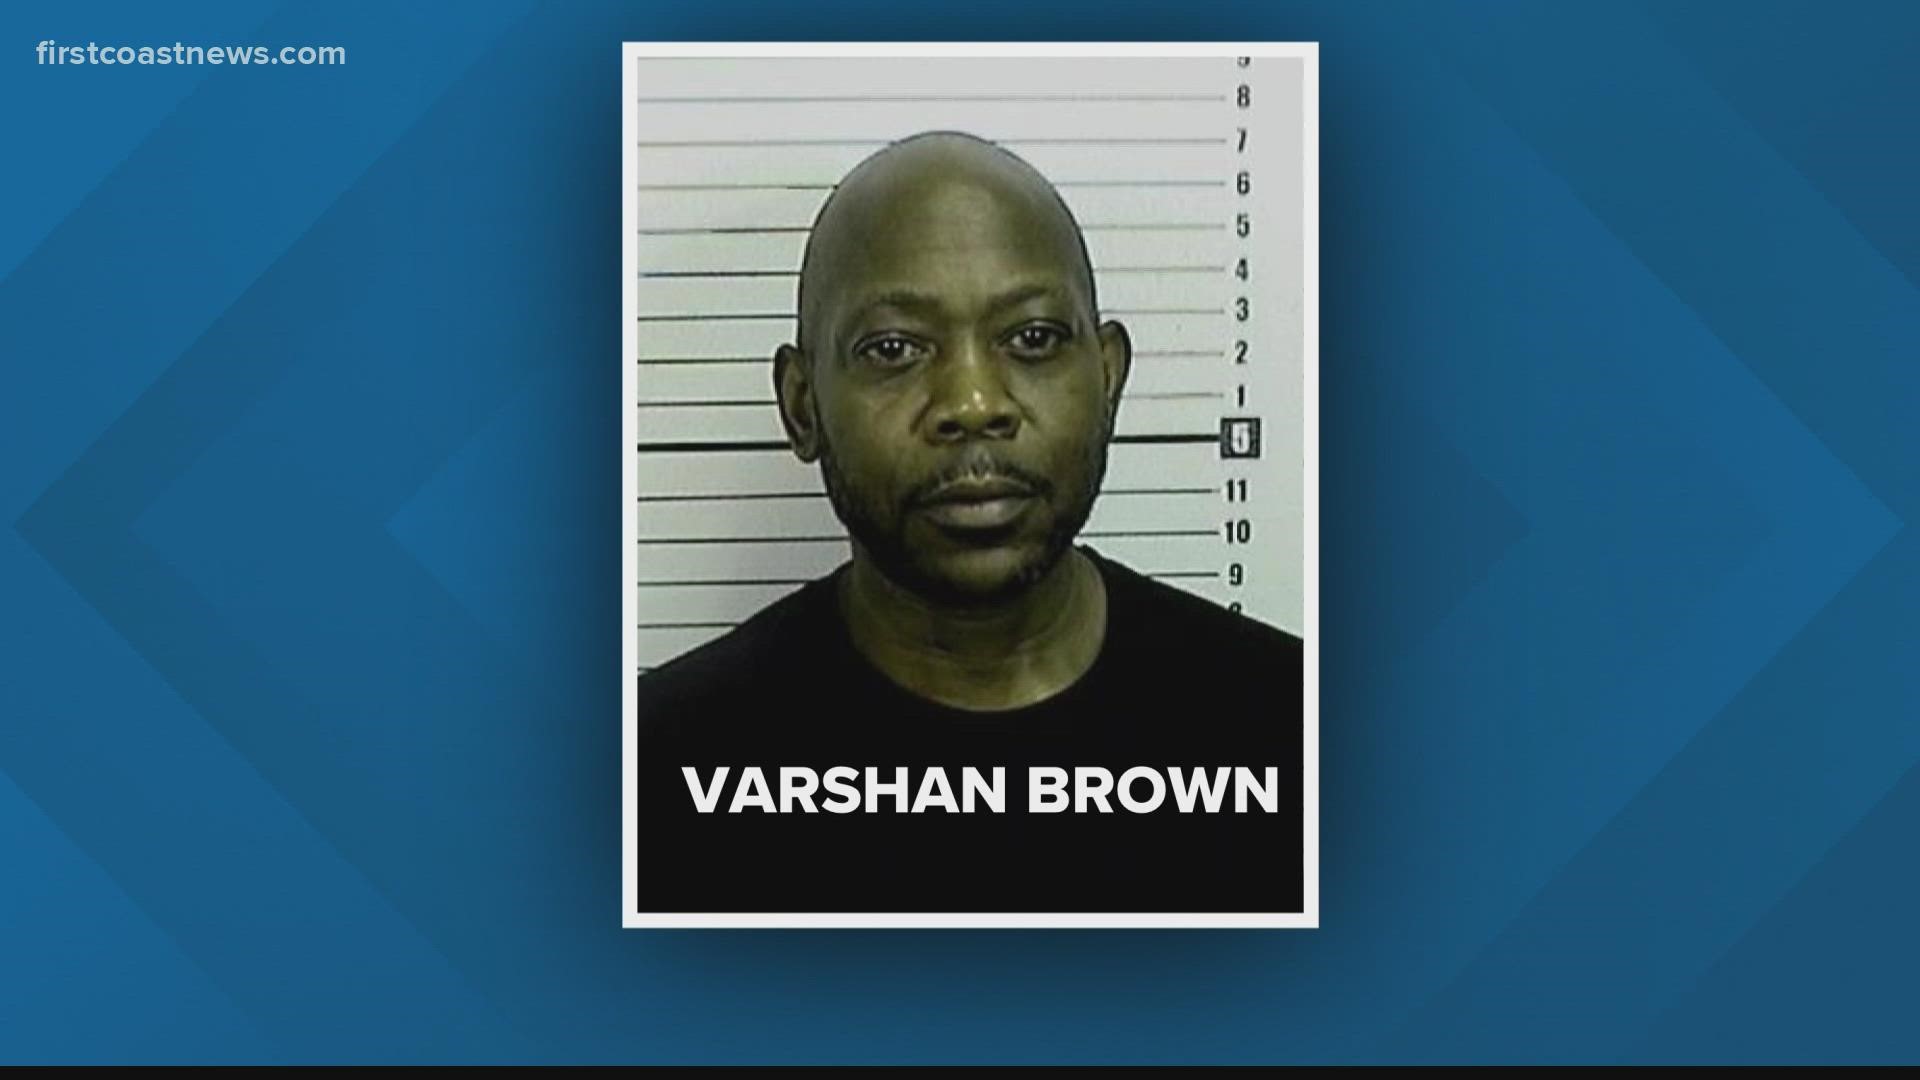 Police say they were serving a drug warrant when a person inside a home fired shots and they fired back, killing Latoya James. Now, Varshan Brown is facing charges.